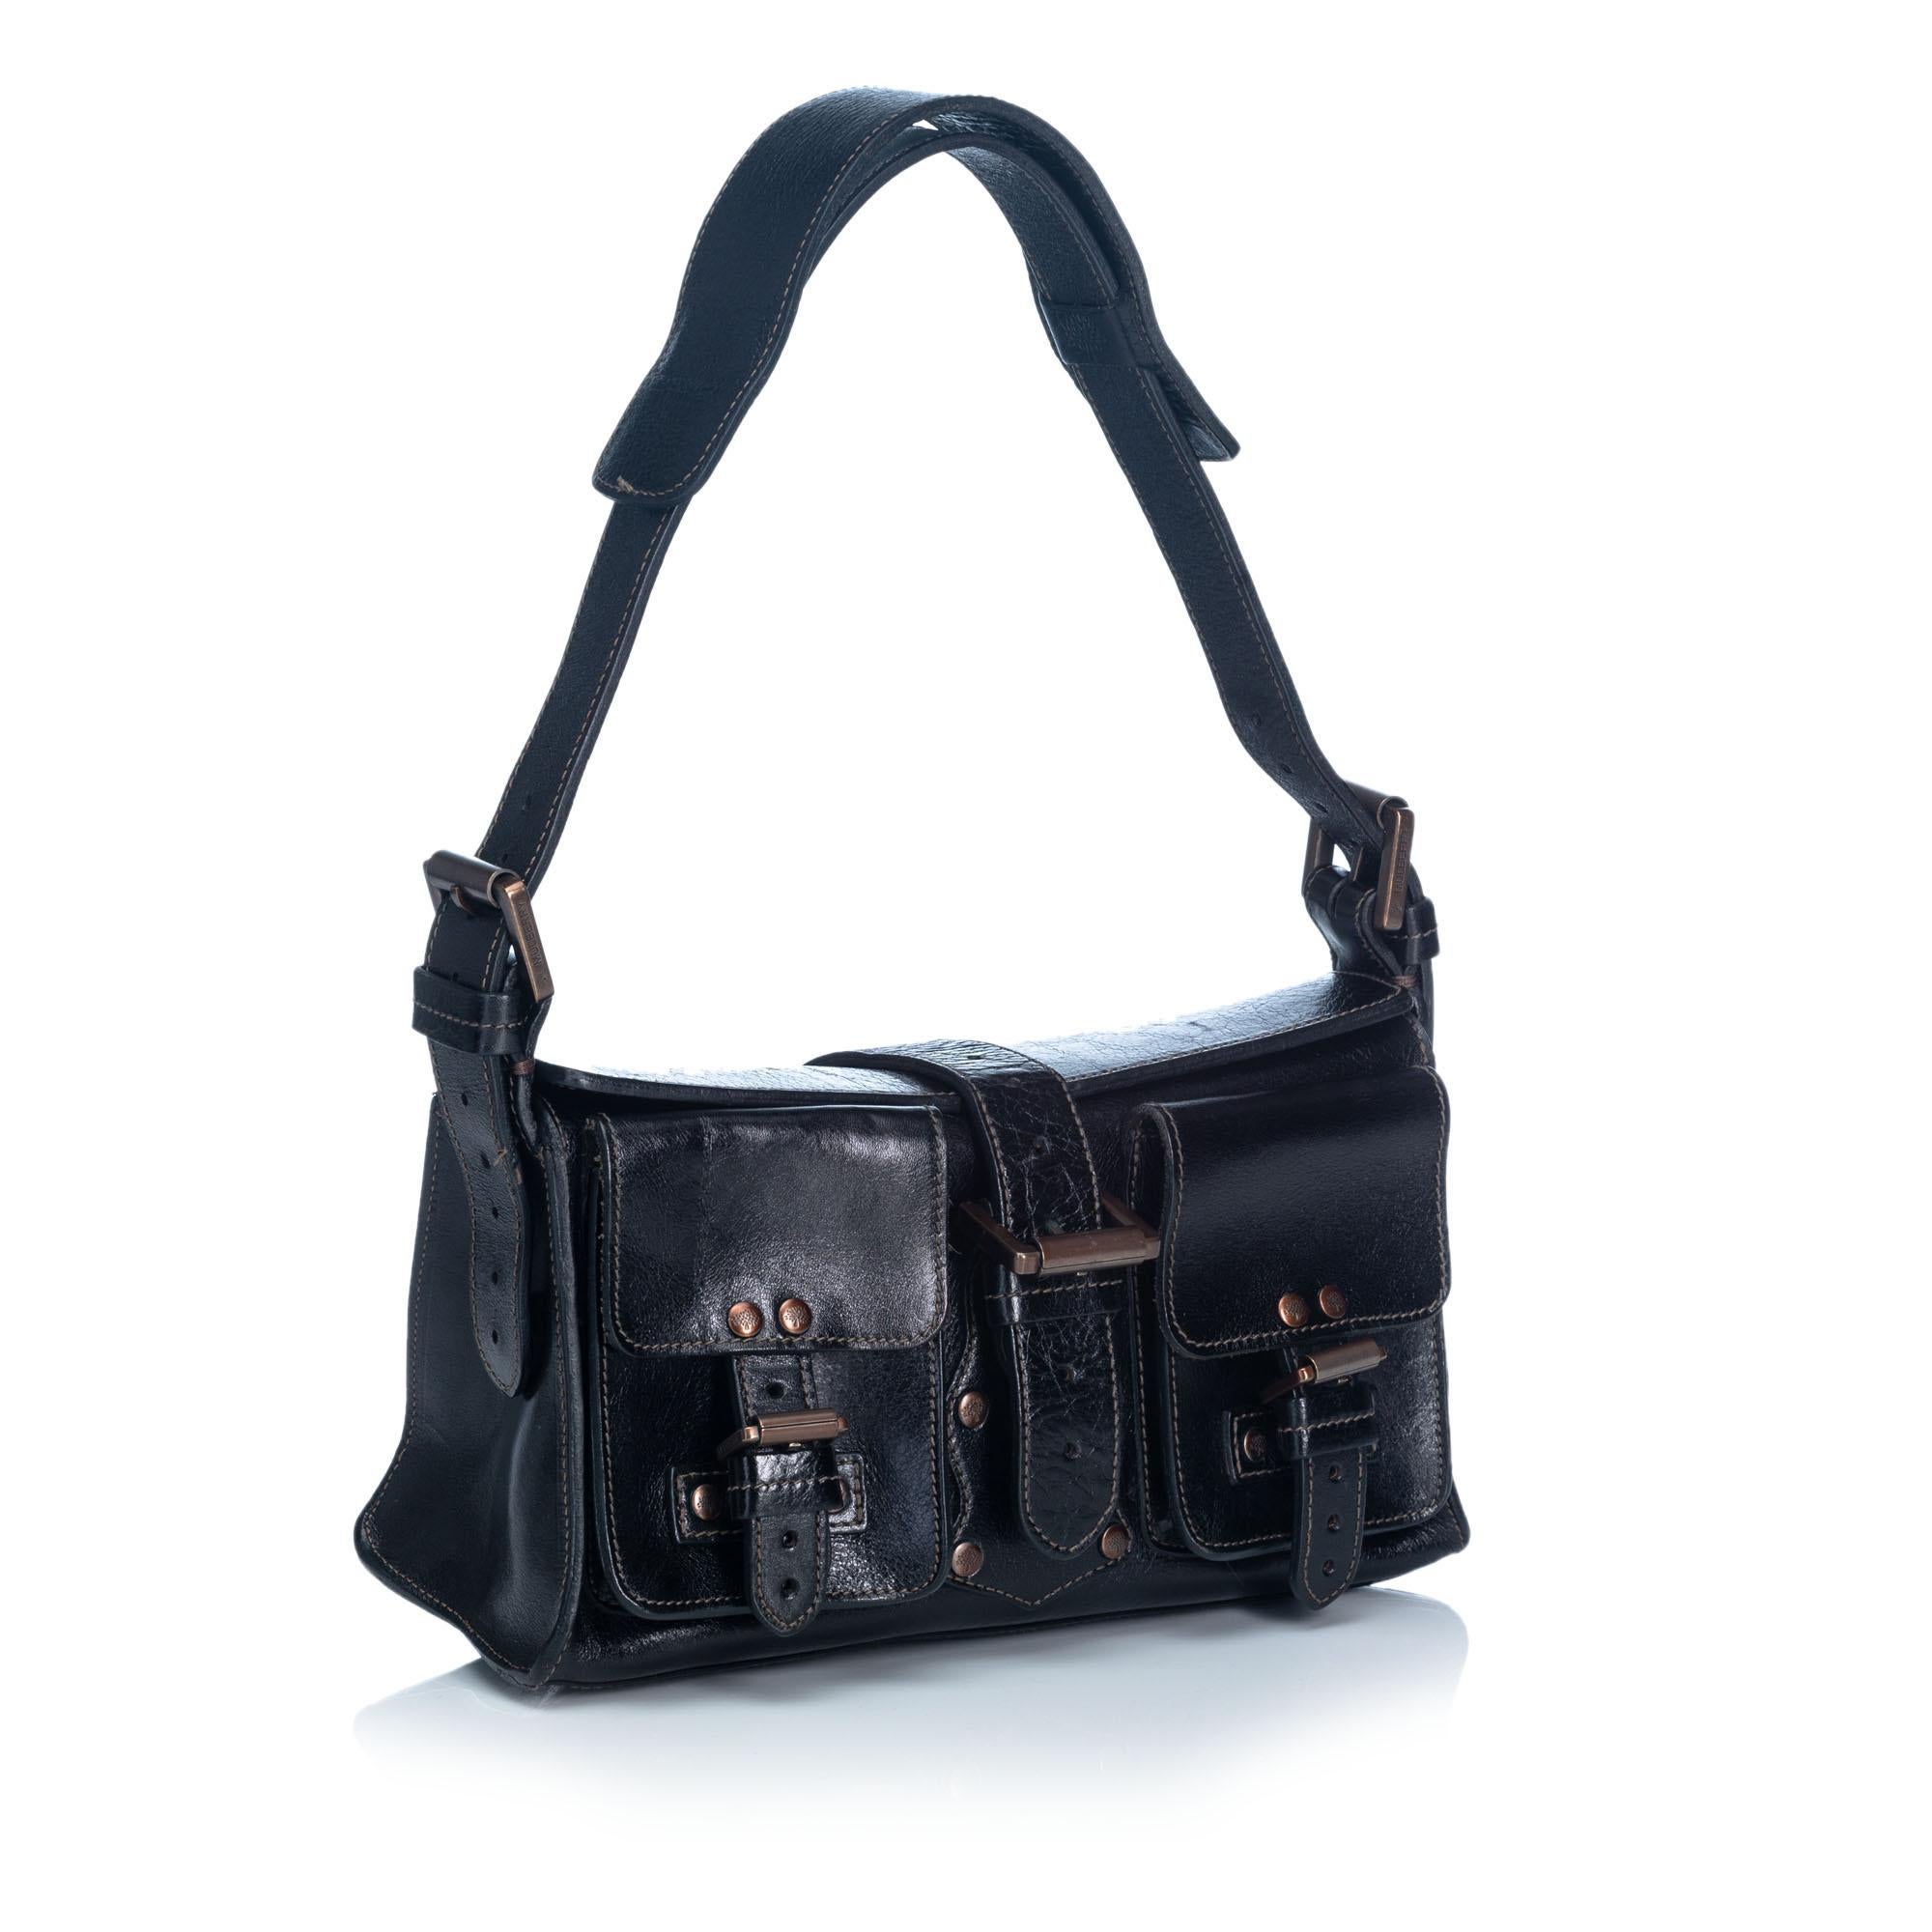 The Roxanne handbag features a leather body with stud and belt details, front exterior pockets with a buckle closure, a flat leather handle, and a box flap with a buckle closure. It carries as B+ condition rating.

Inclusions: 
Dust